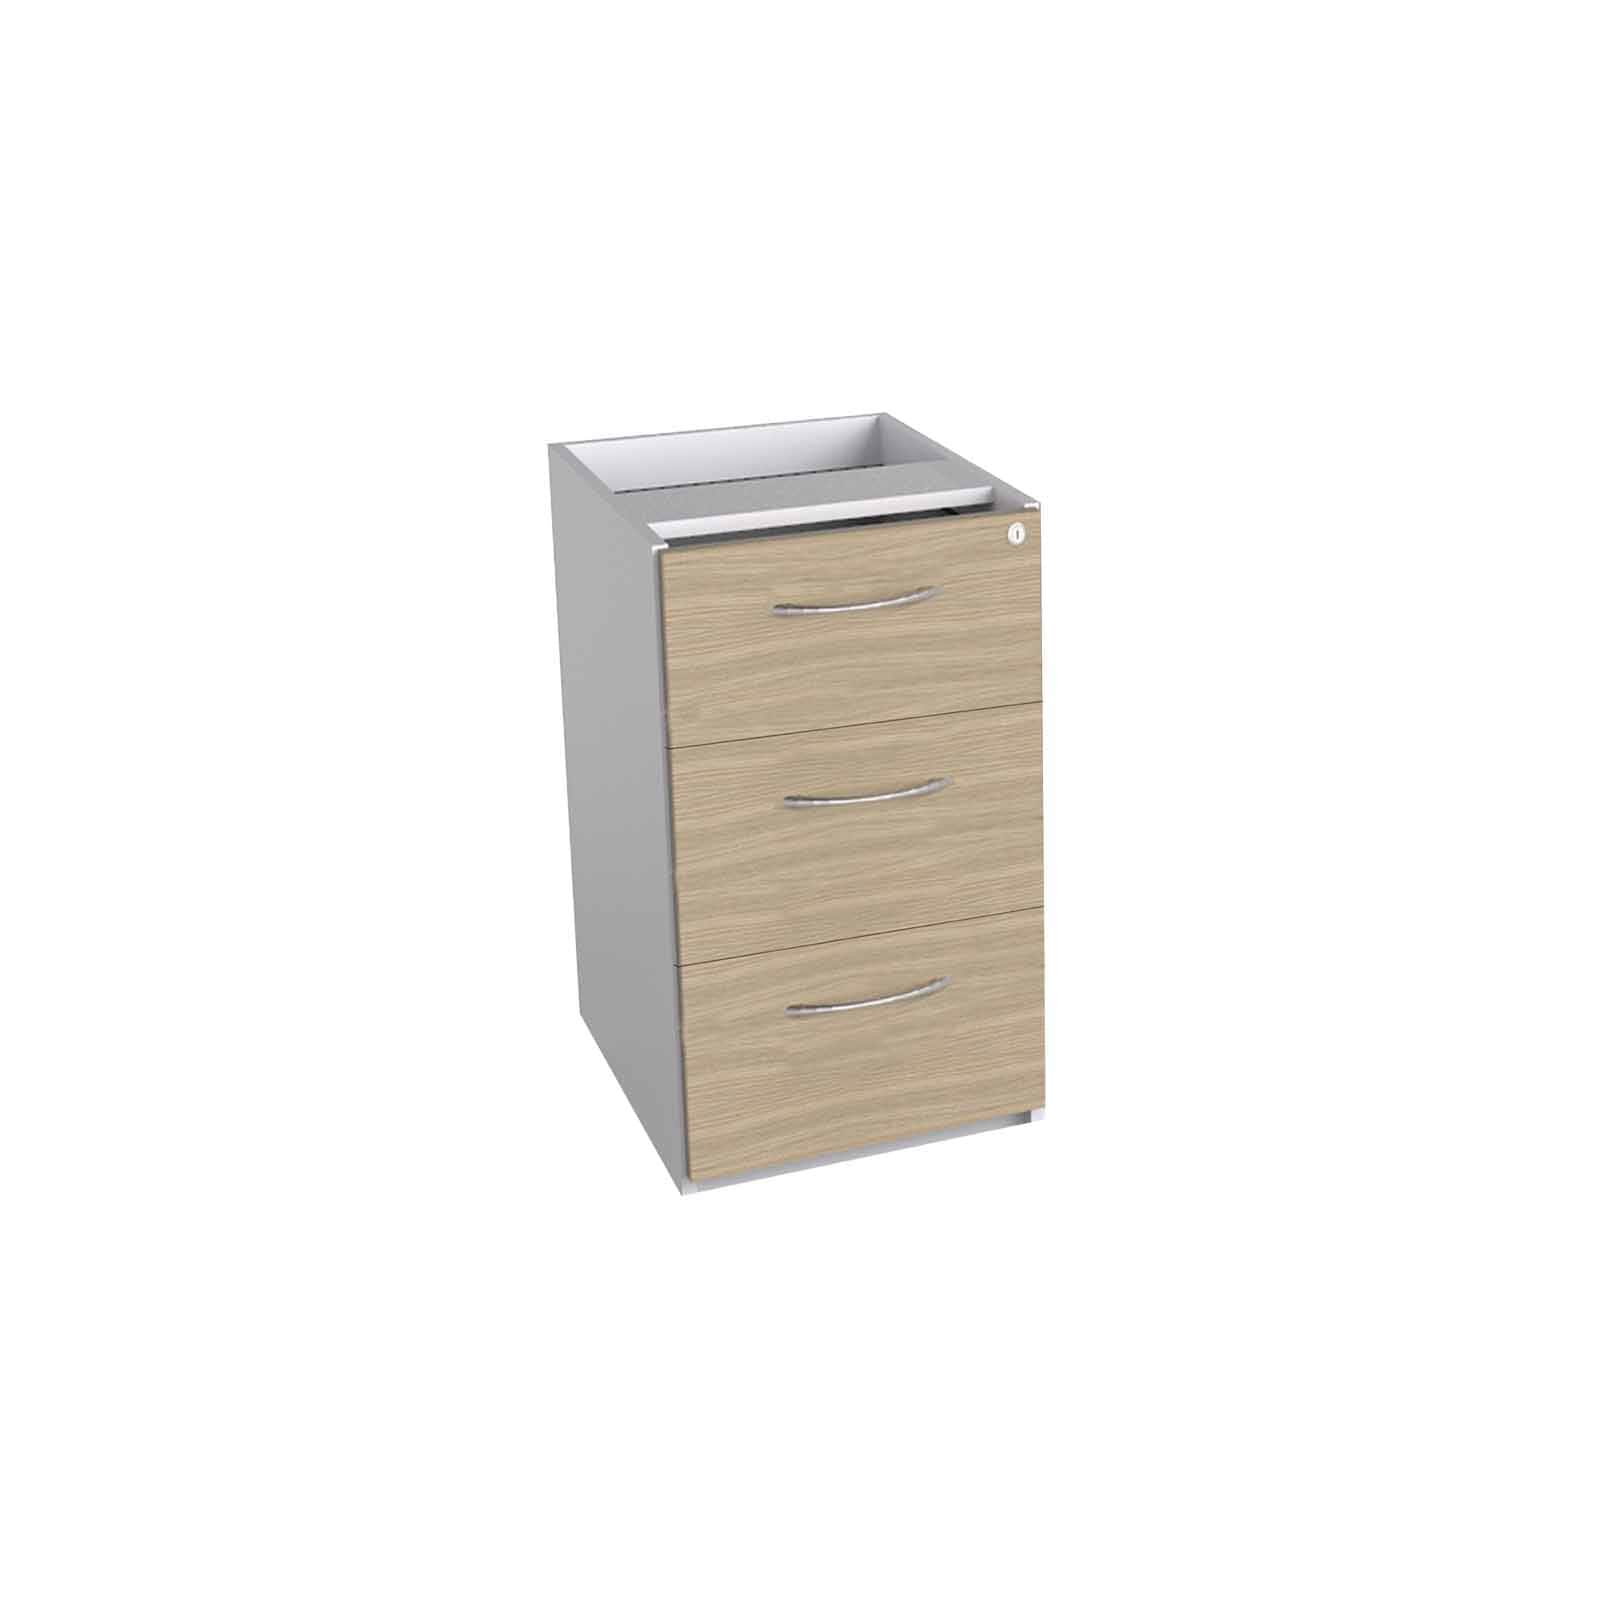 MADE TO ORDER Fixed 3 Drawer Pedestal Slim W310 x D530 x H516mm